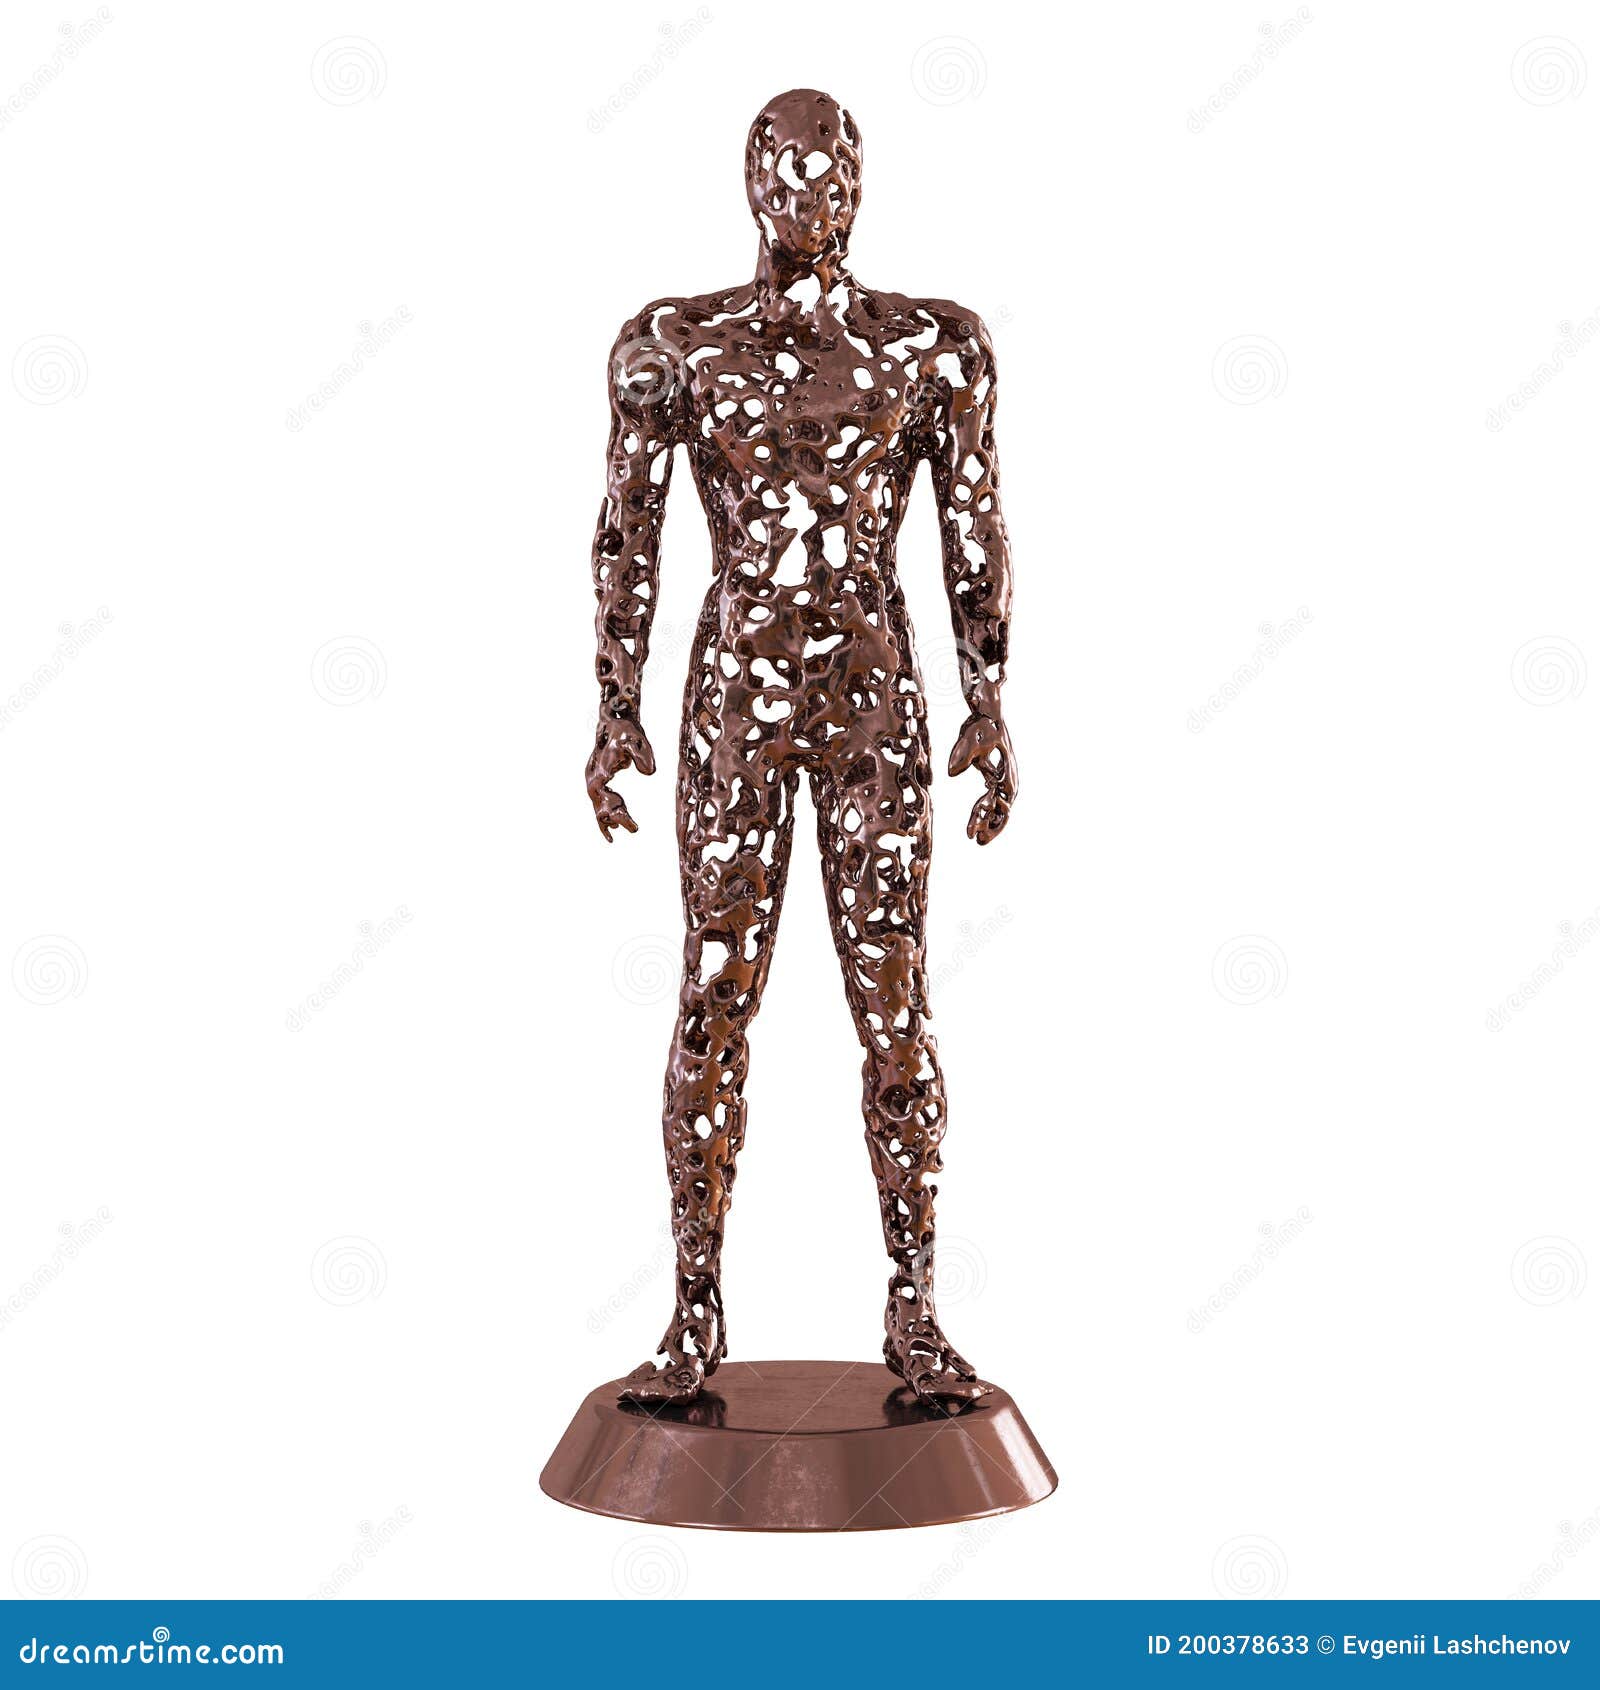 Iron Sculpture of a Man Made of Metal with Many Holes All Over His Body. 3d  Rendering Stock Illustration - Illustration of white, imagery: 200378633